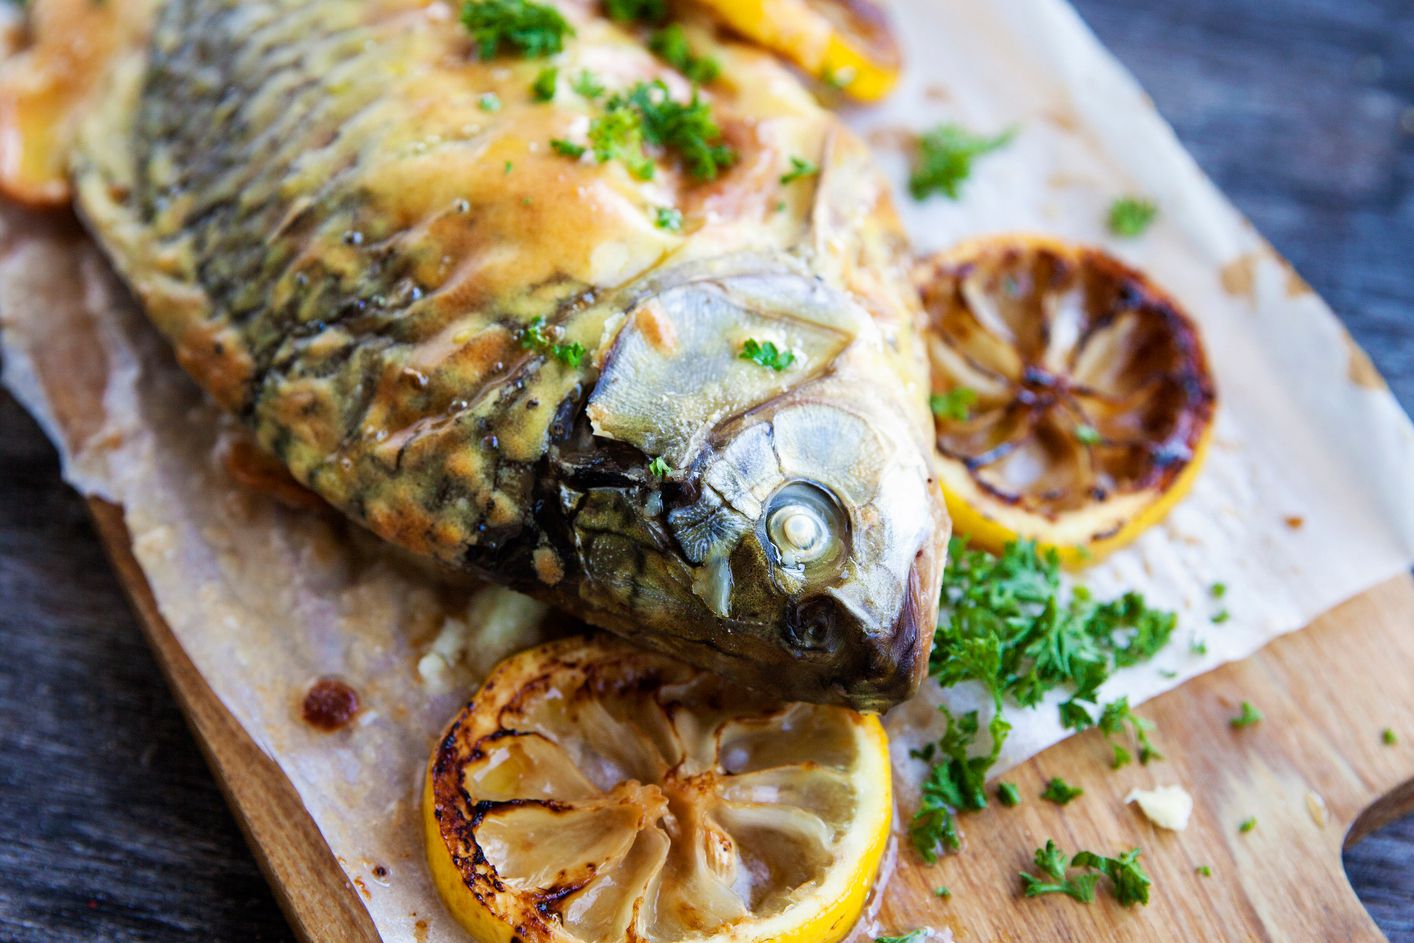 How to Clean and Prepare Fresh Carp for Dinner - BakeD Carp Fish GettyImages 511687898 591f276b5f9b58f4c010e600